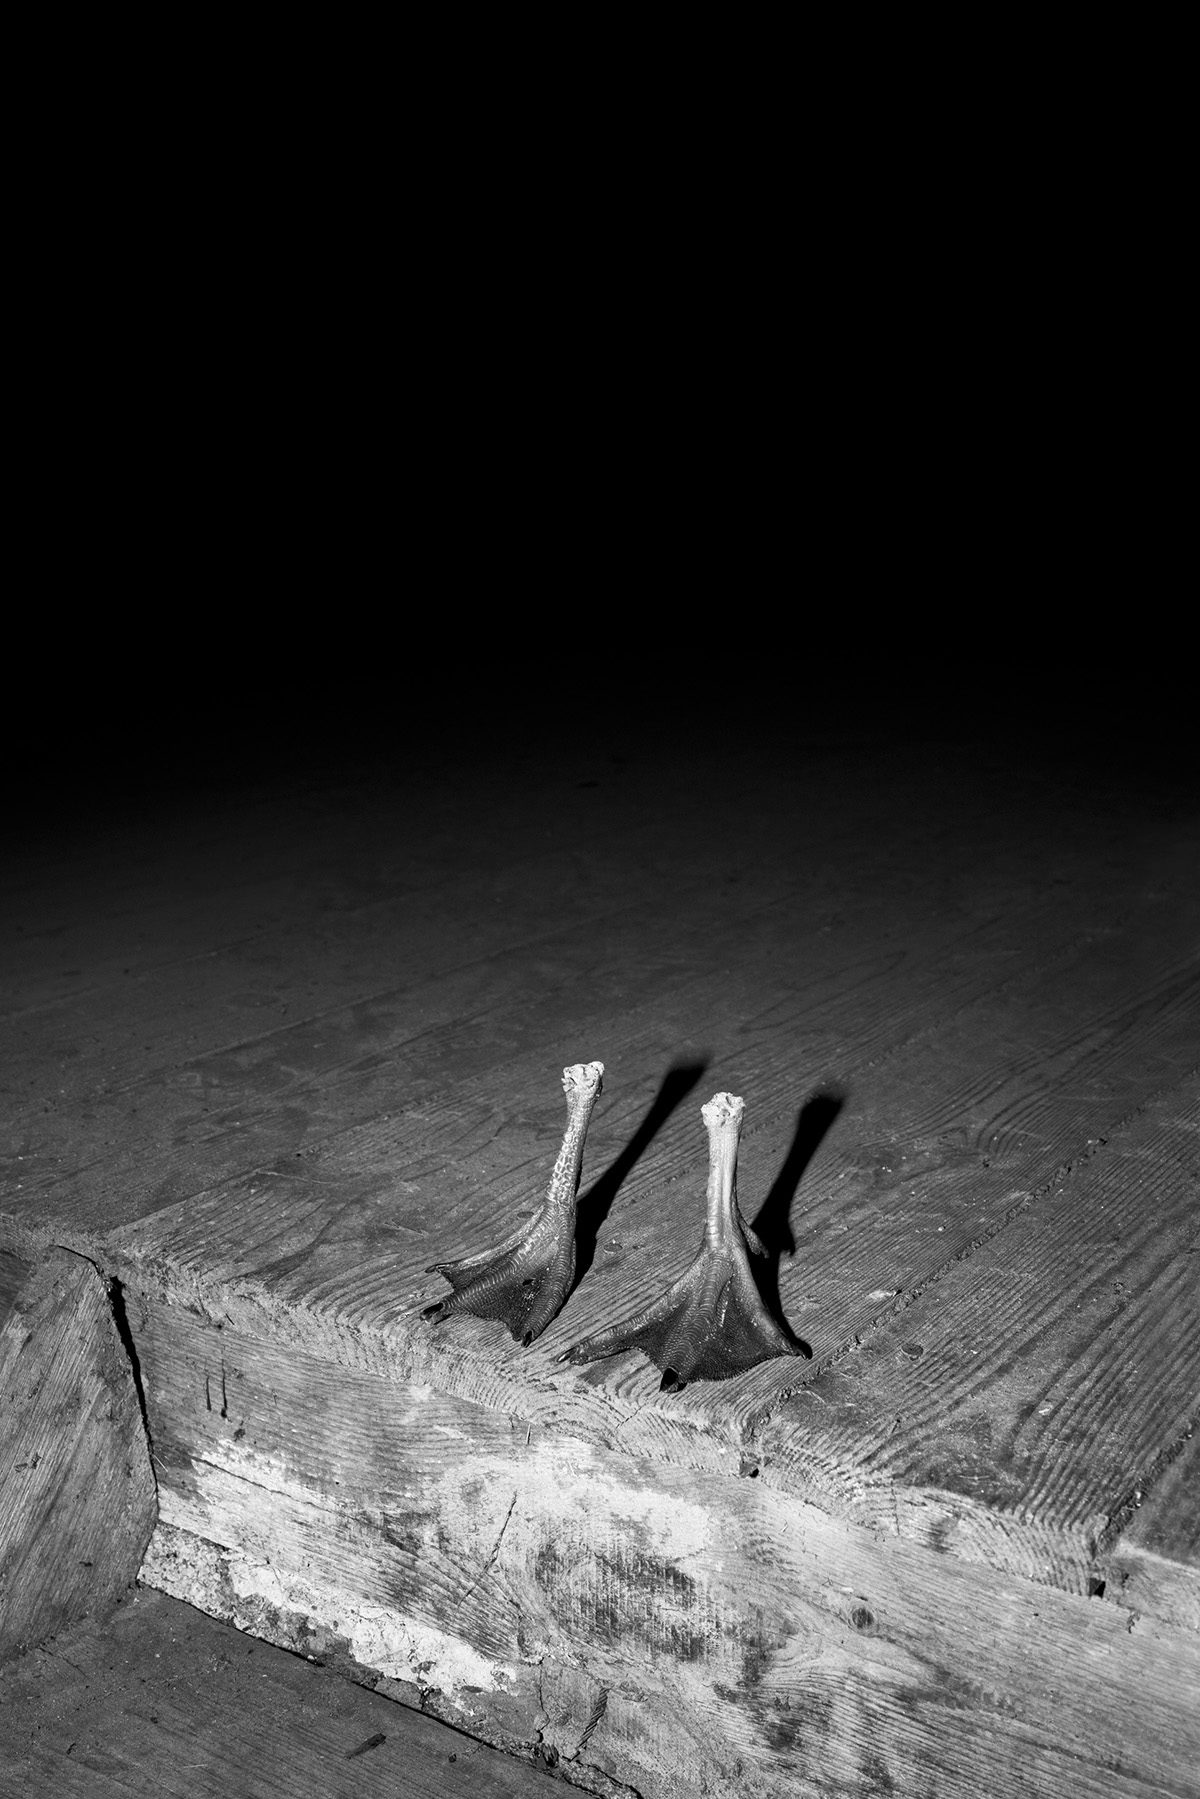 Black and white photograph from Plexus by Elena Helfrecht showing two dismembered goose feet positioned upright on a wooden floor